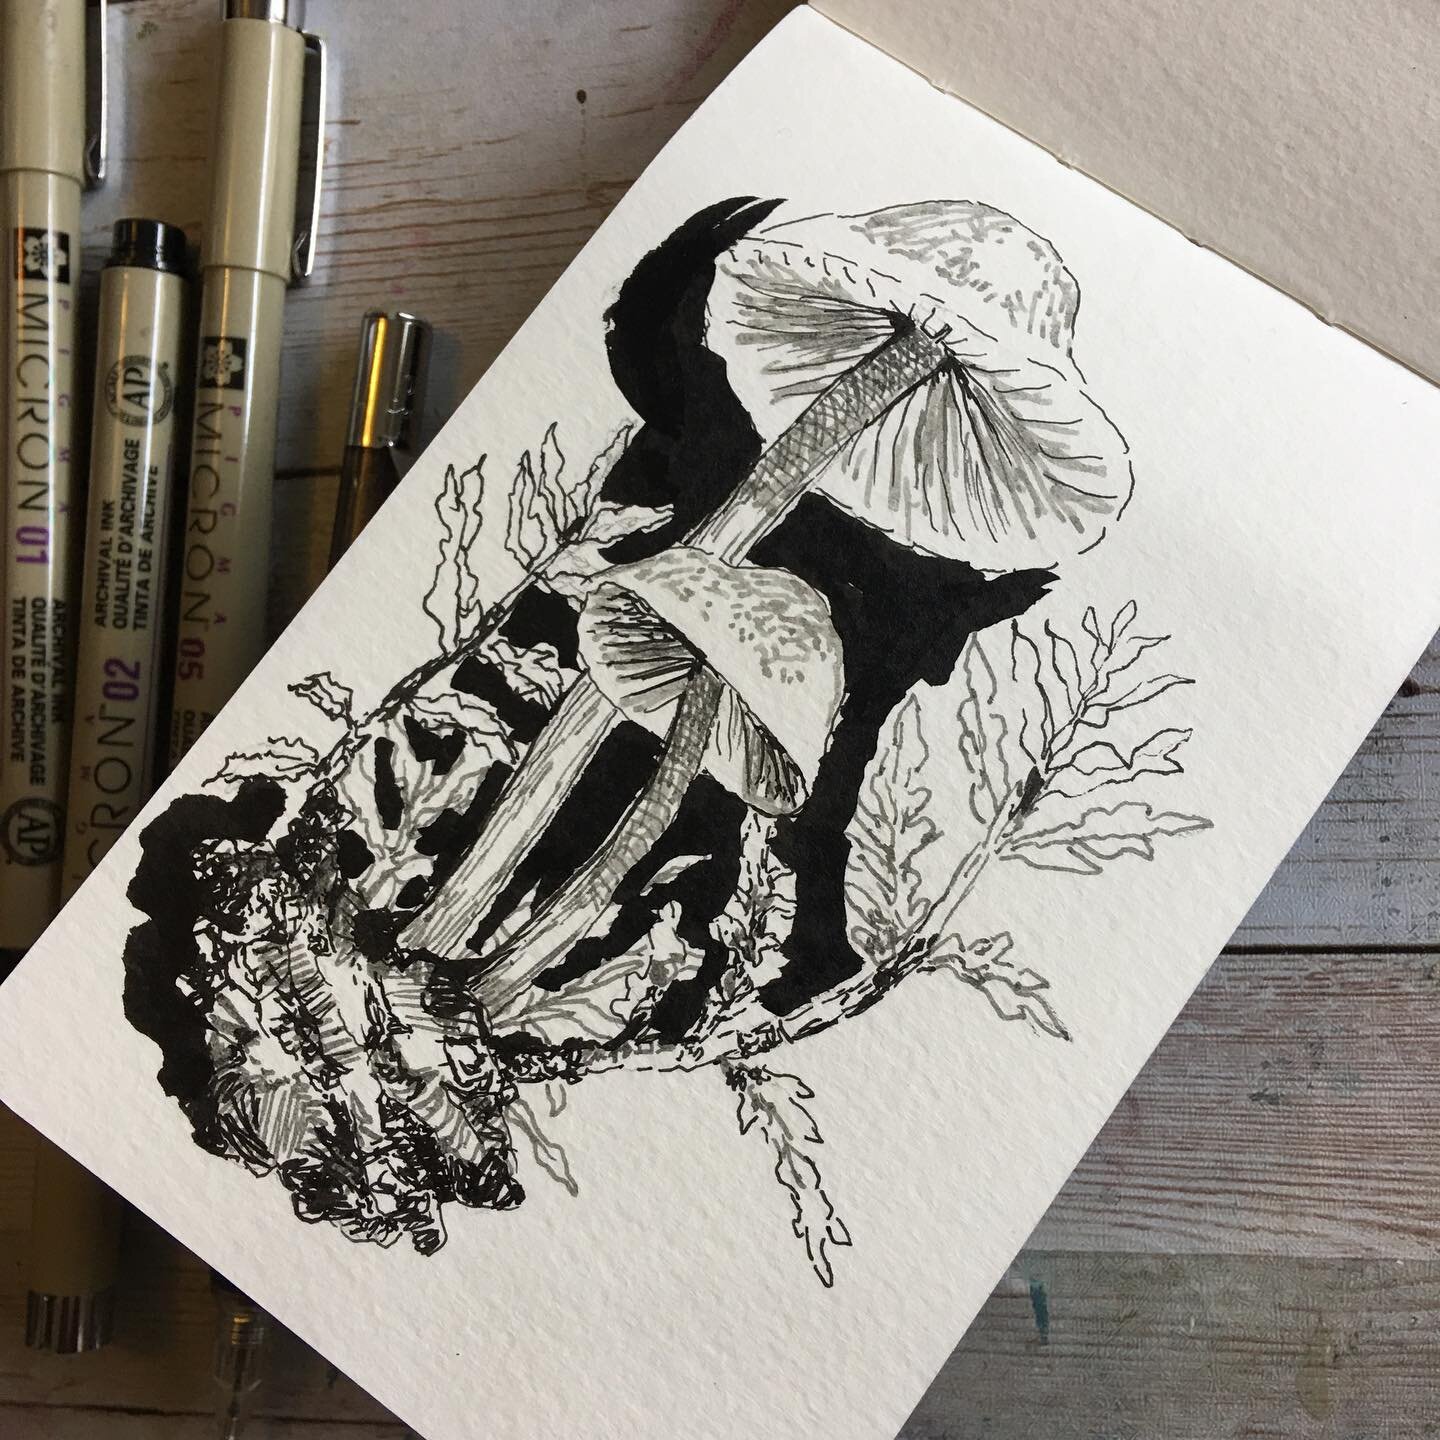 #inktober2022  #fungi #mushrooms #sketchbook #quicksketch #micronpen #doodle  going to shoot for daily inktober drawings and going to aim for #fungi and be happy if I stick to #botanicals working in a small #moleskine watercolor book to keep it doabl